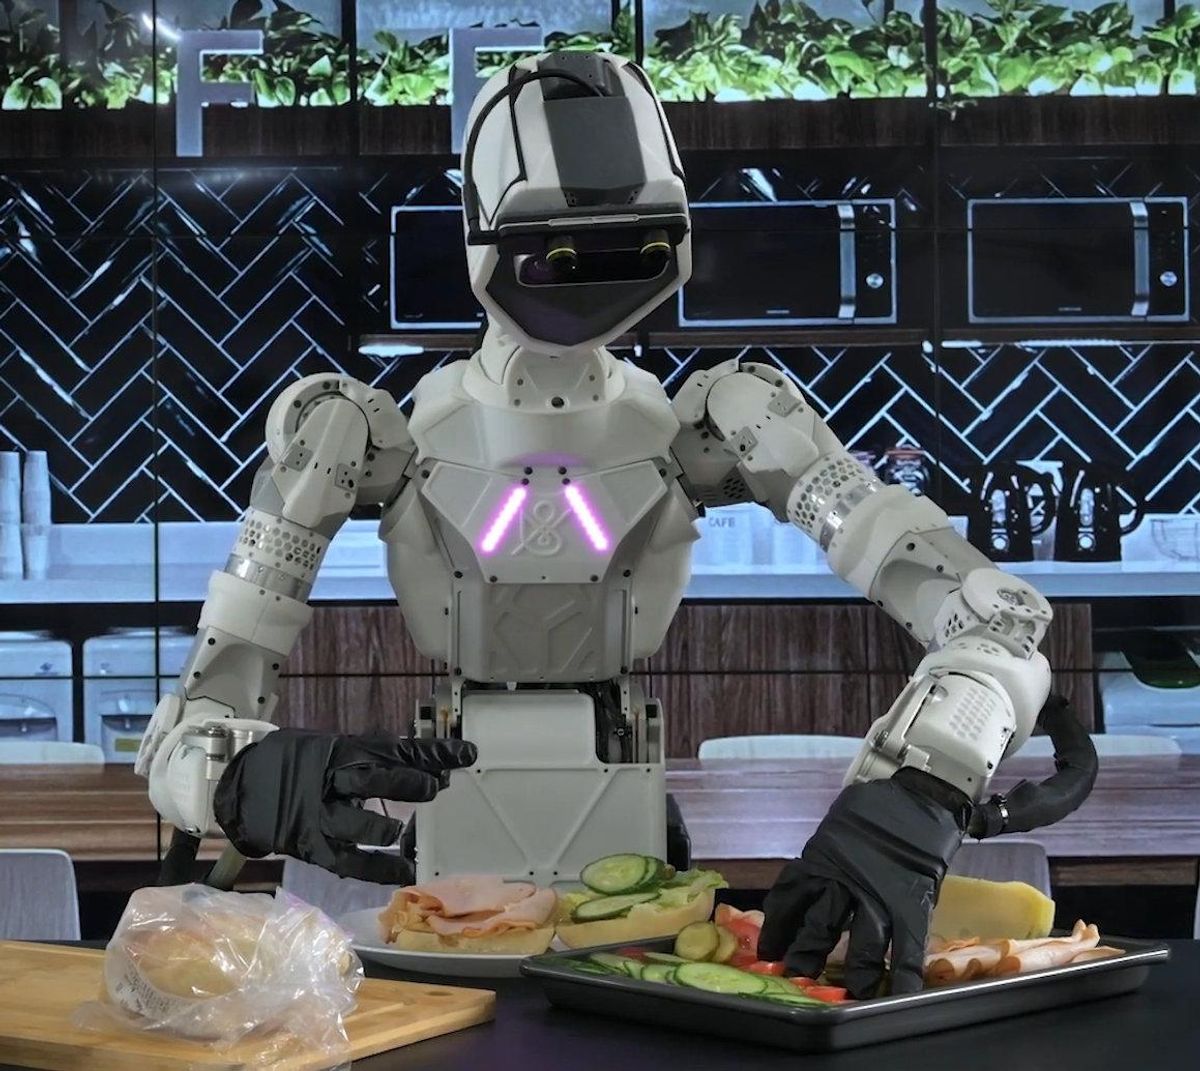 A teleoperated humanoid robot torso stands in a kitchen assembling a turkey sandwich from ingredients on a tray